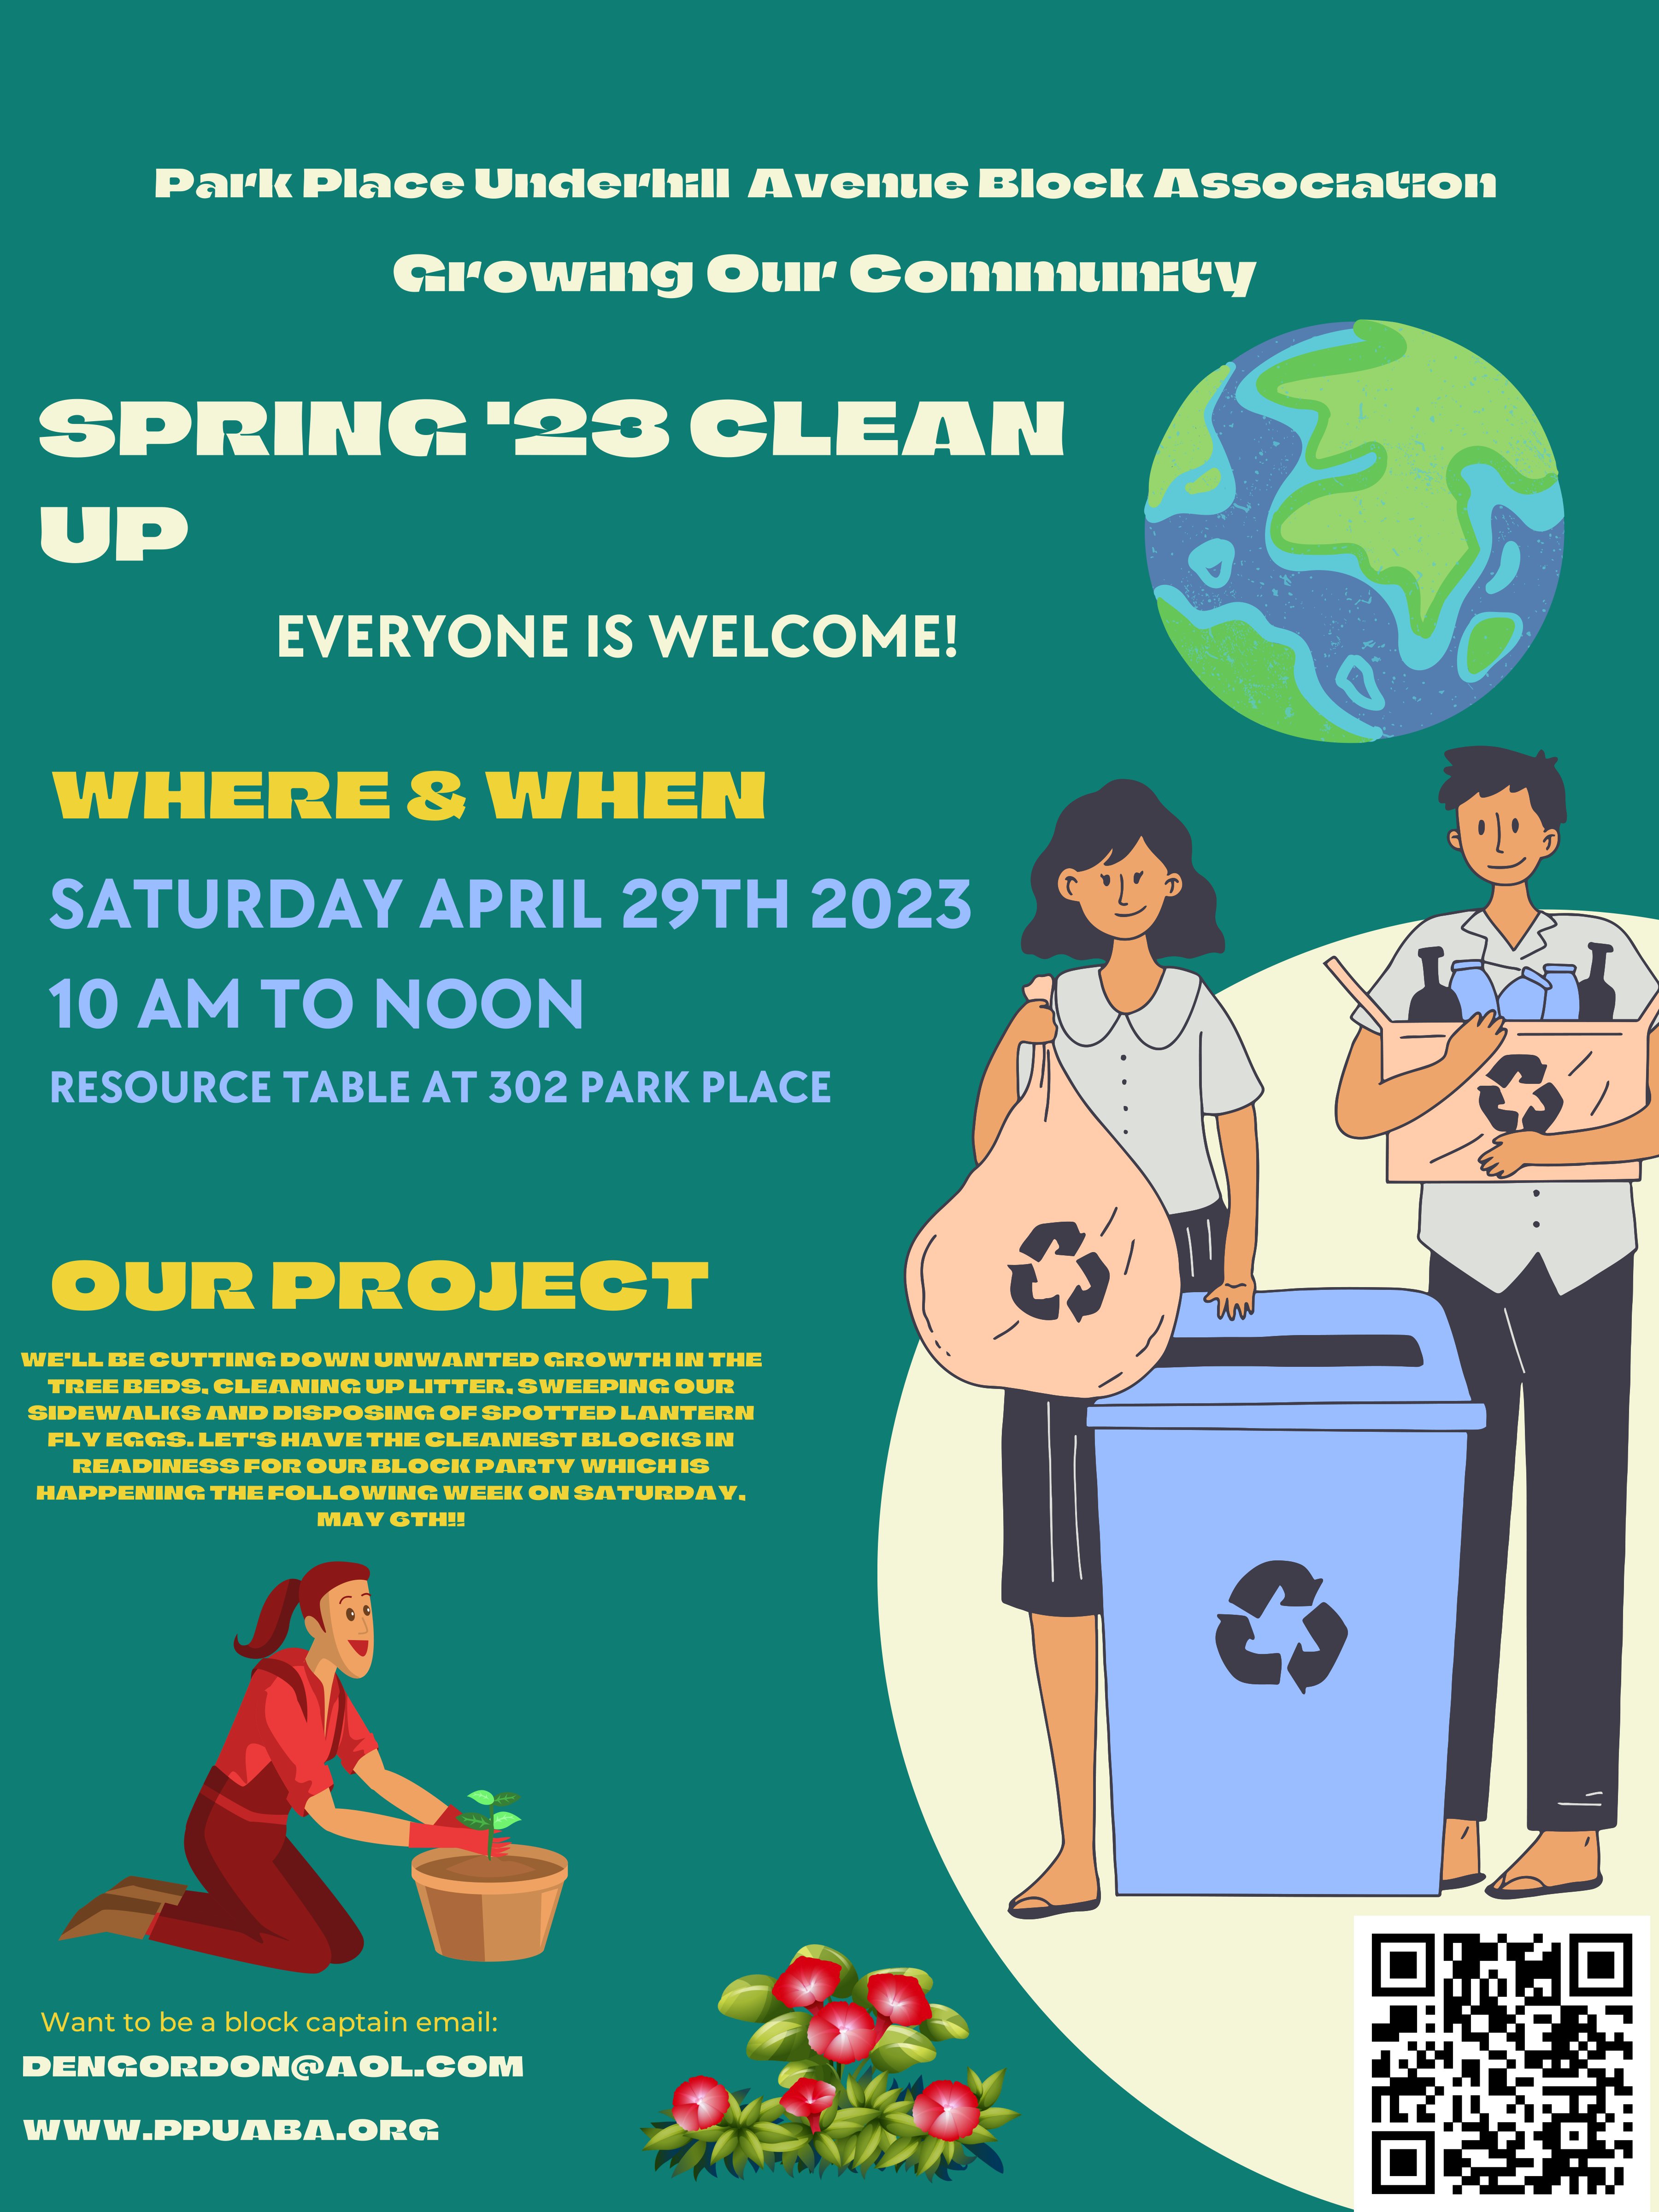 PPUABA spring clean-up flyer 2023-04-29